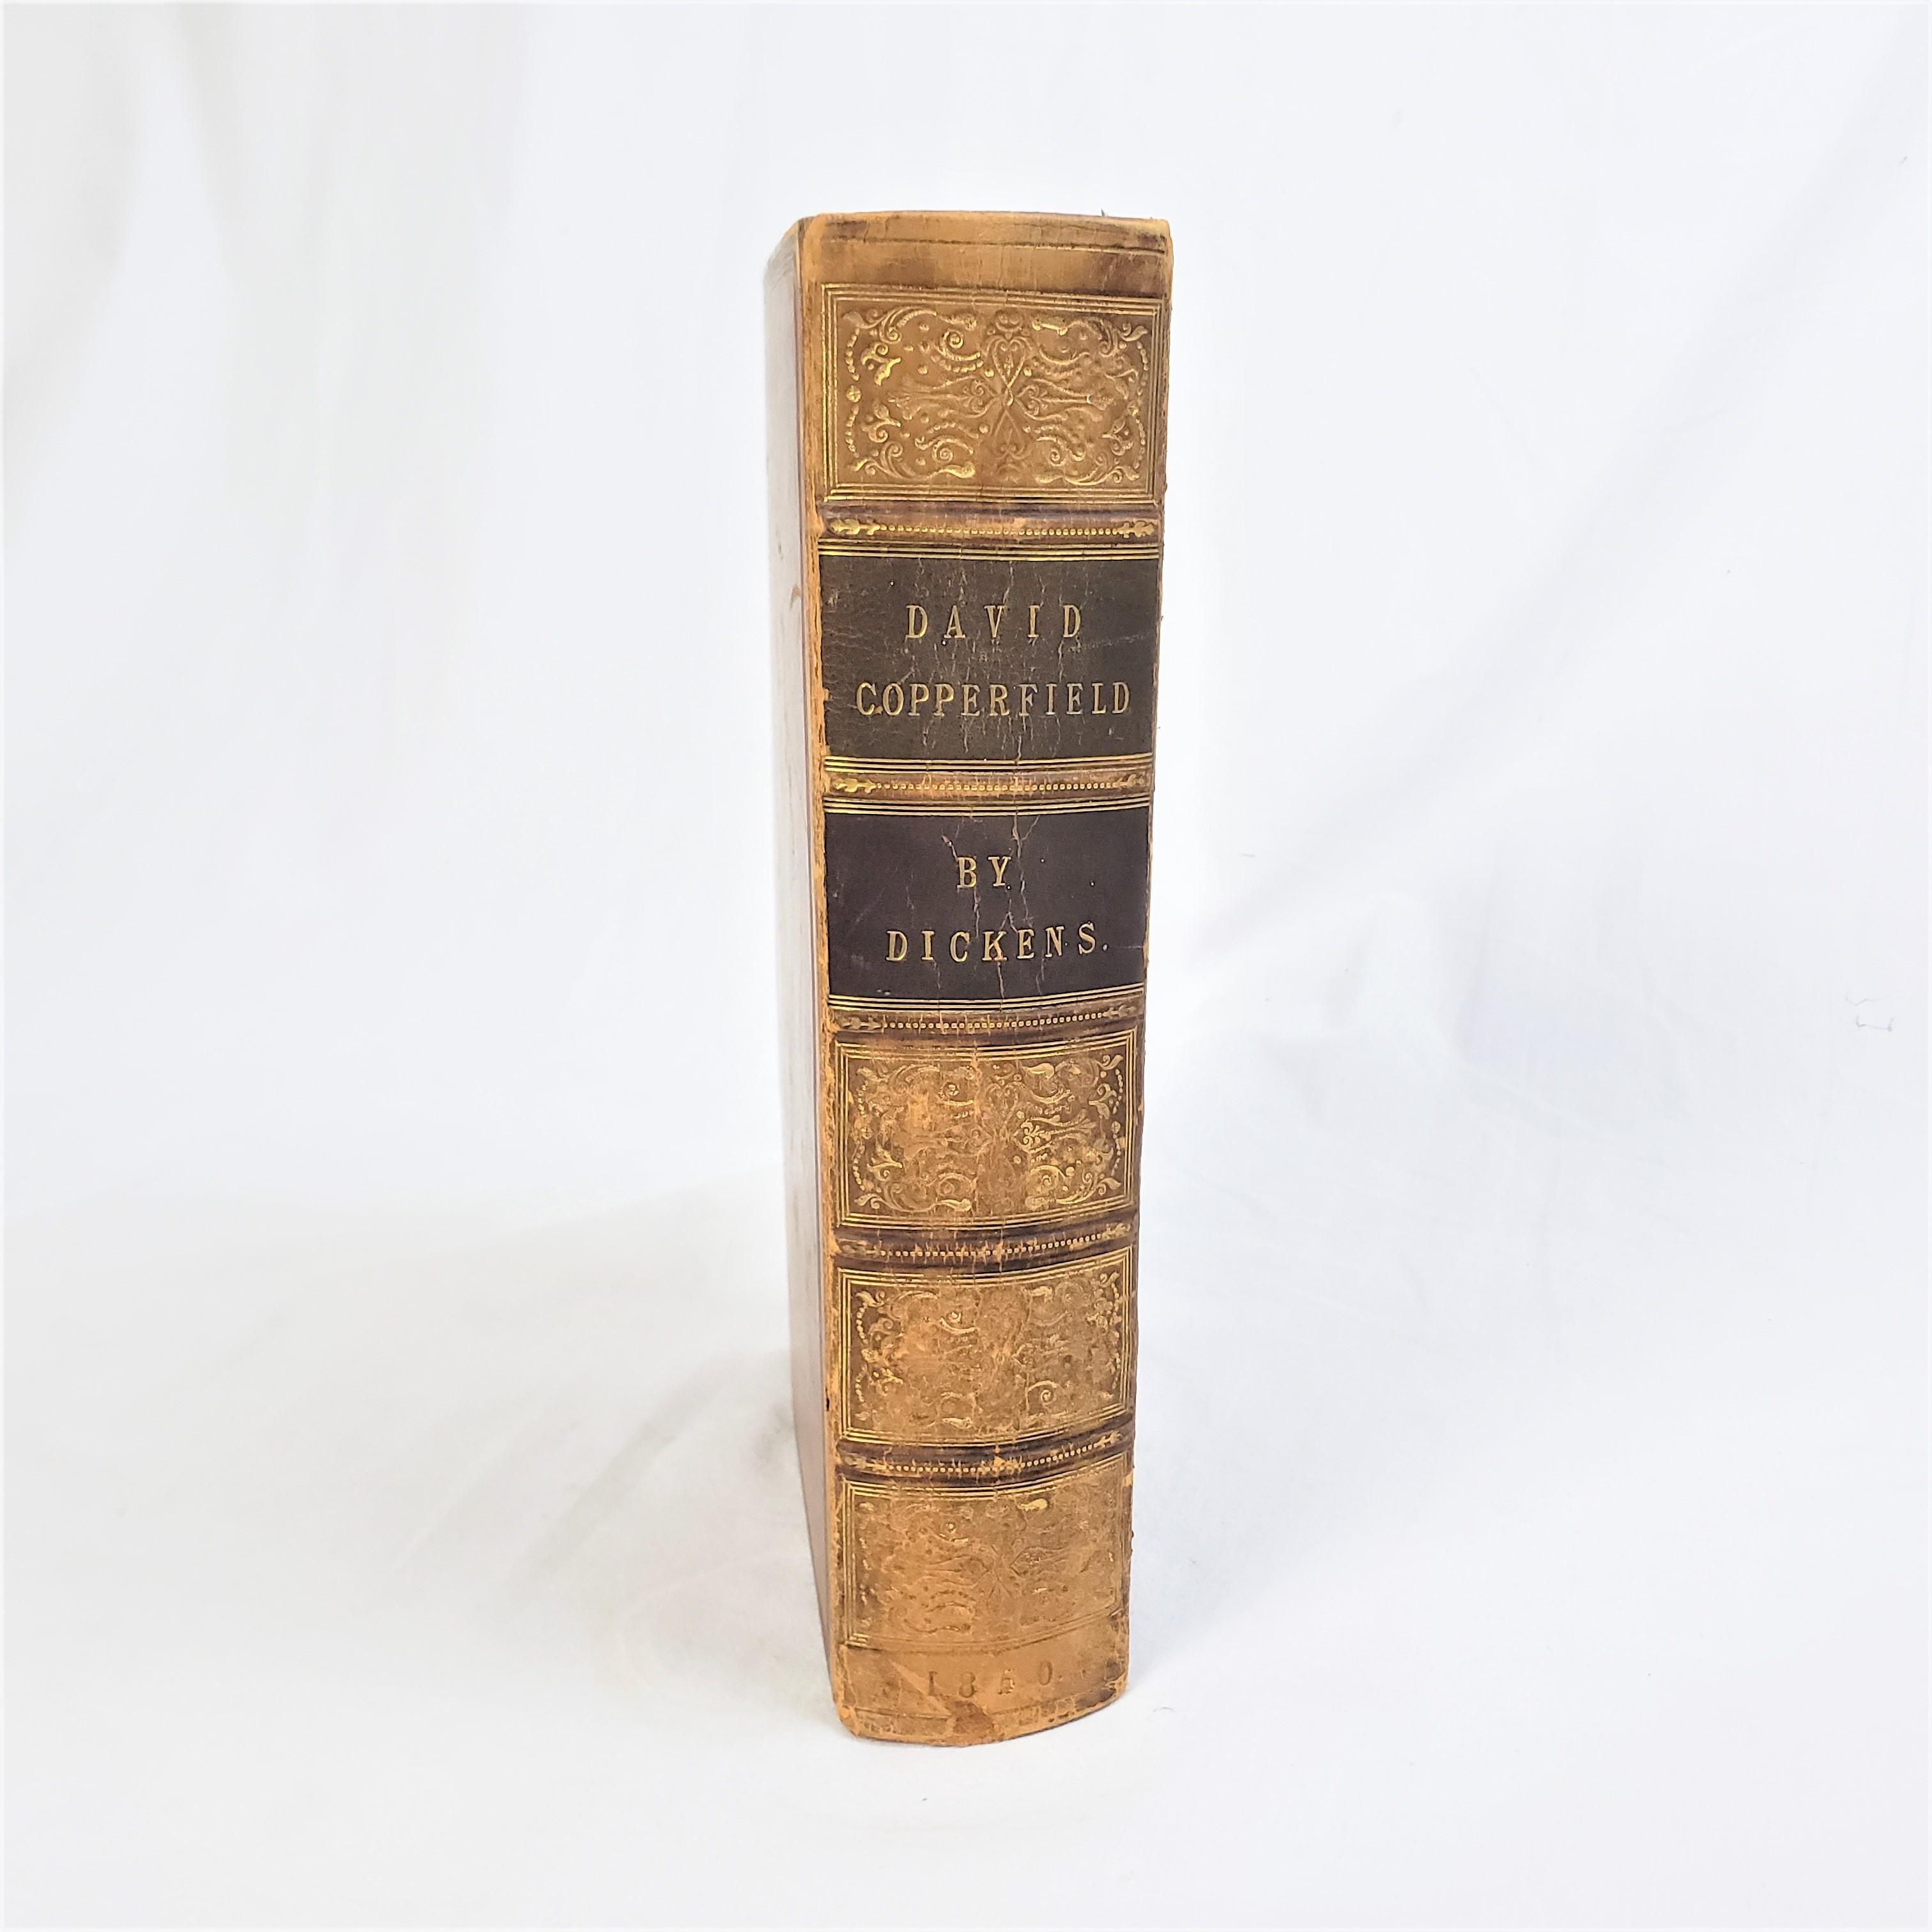 This antique 1st edition book titled David Copperfield was authored by Charles Dickens and published by Chapman and Hall of England in 1850 in the period Victorian style with etchings by Hablot Knight Browne 